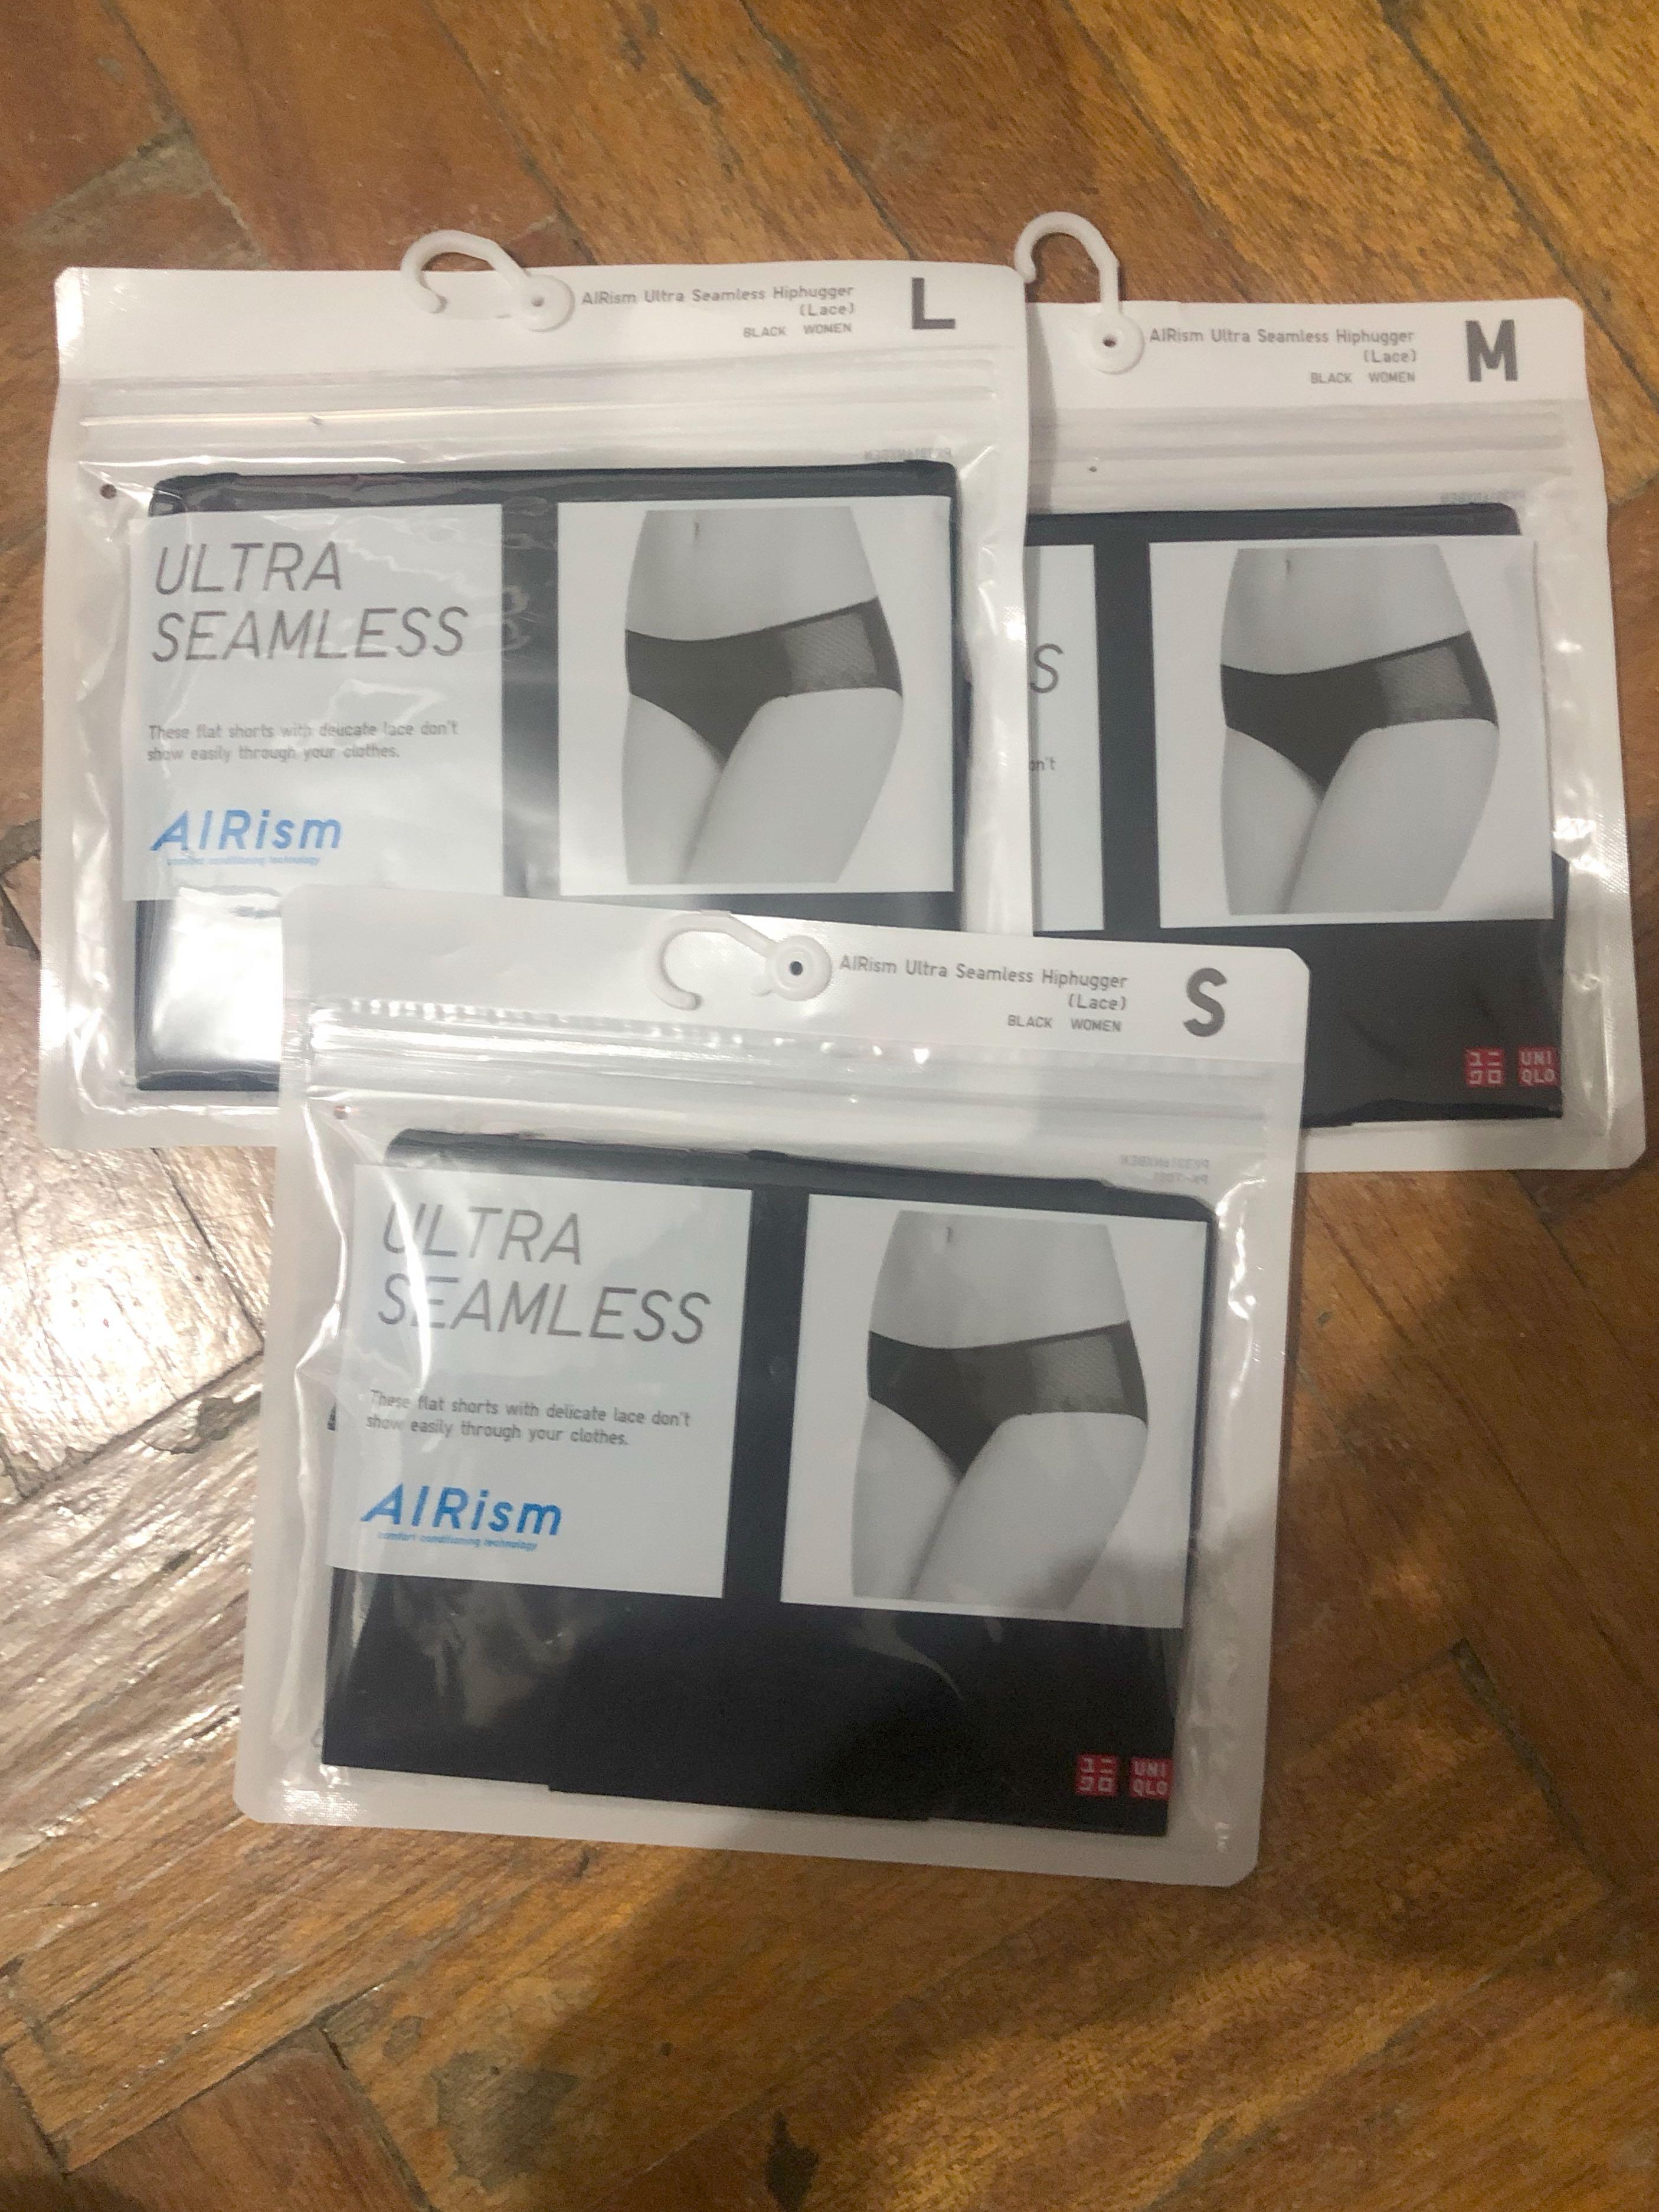 Brand New Auth Uniqlo Women Airism Seamless Panty - No Packaging